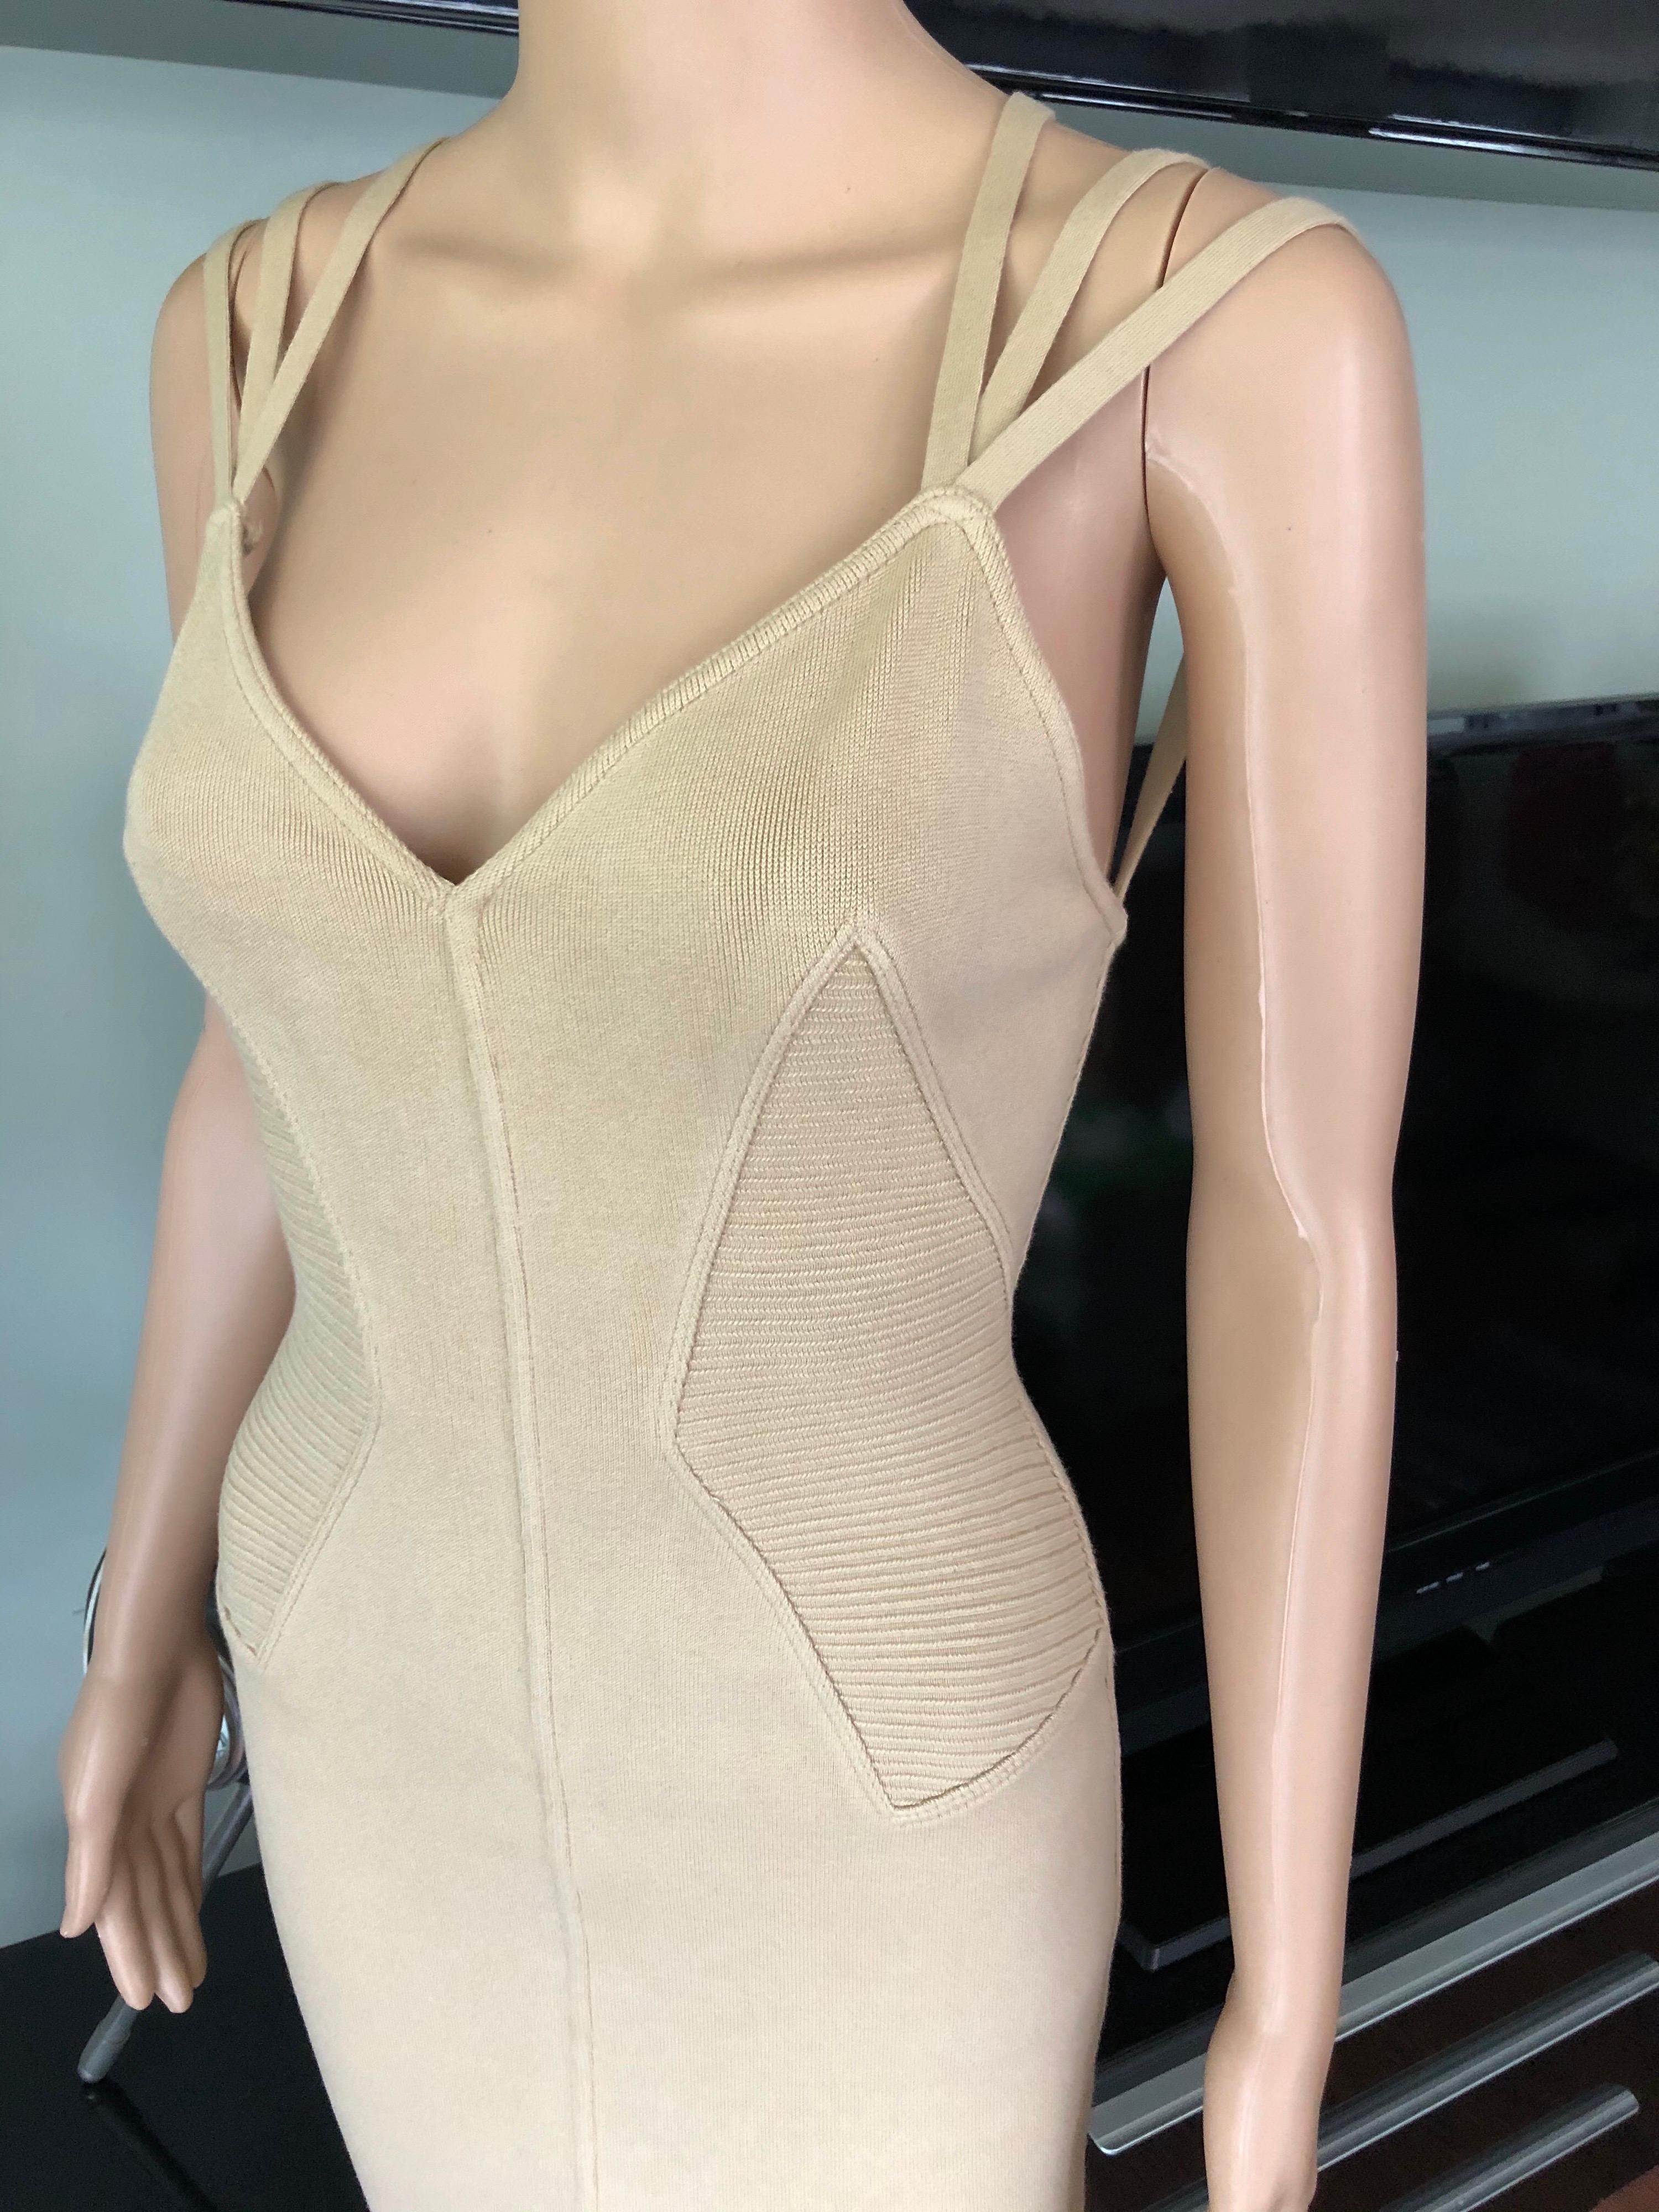 Azzedine Alaia S/S 1990 Vintage Fitted Plunged Décolleté Mini Dress Size Small

Alaïa mini bodycon dress with sweetheart neck and rib knit accent panels throughout.

All Eyes on Alaïa

For the last half-century, the world’s most fashionable and